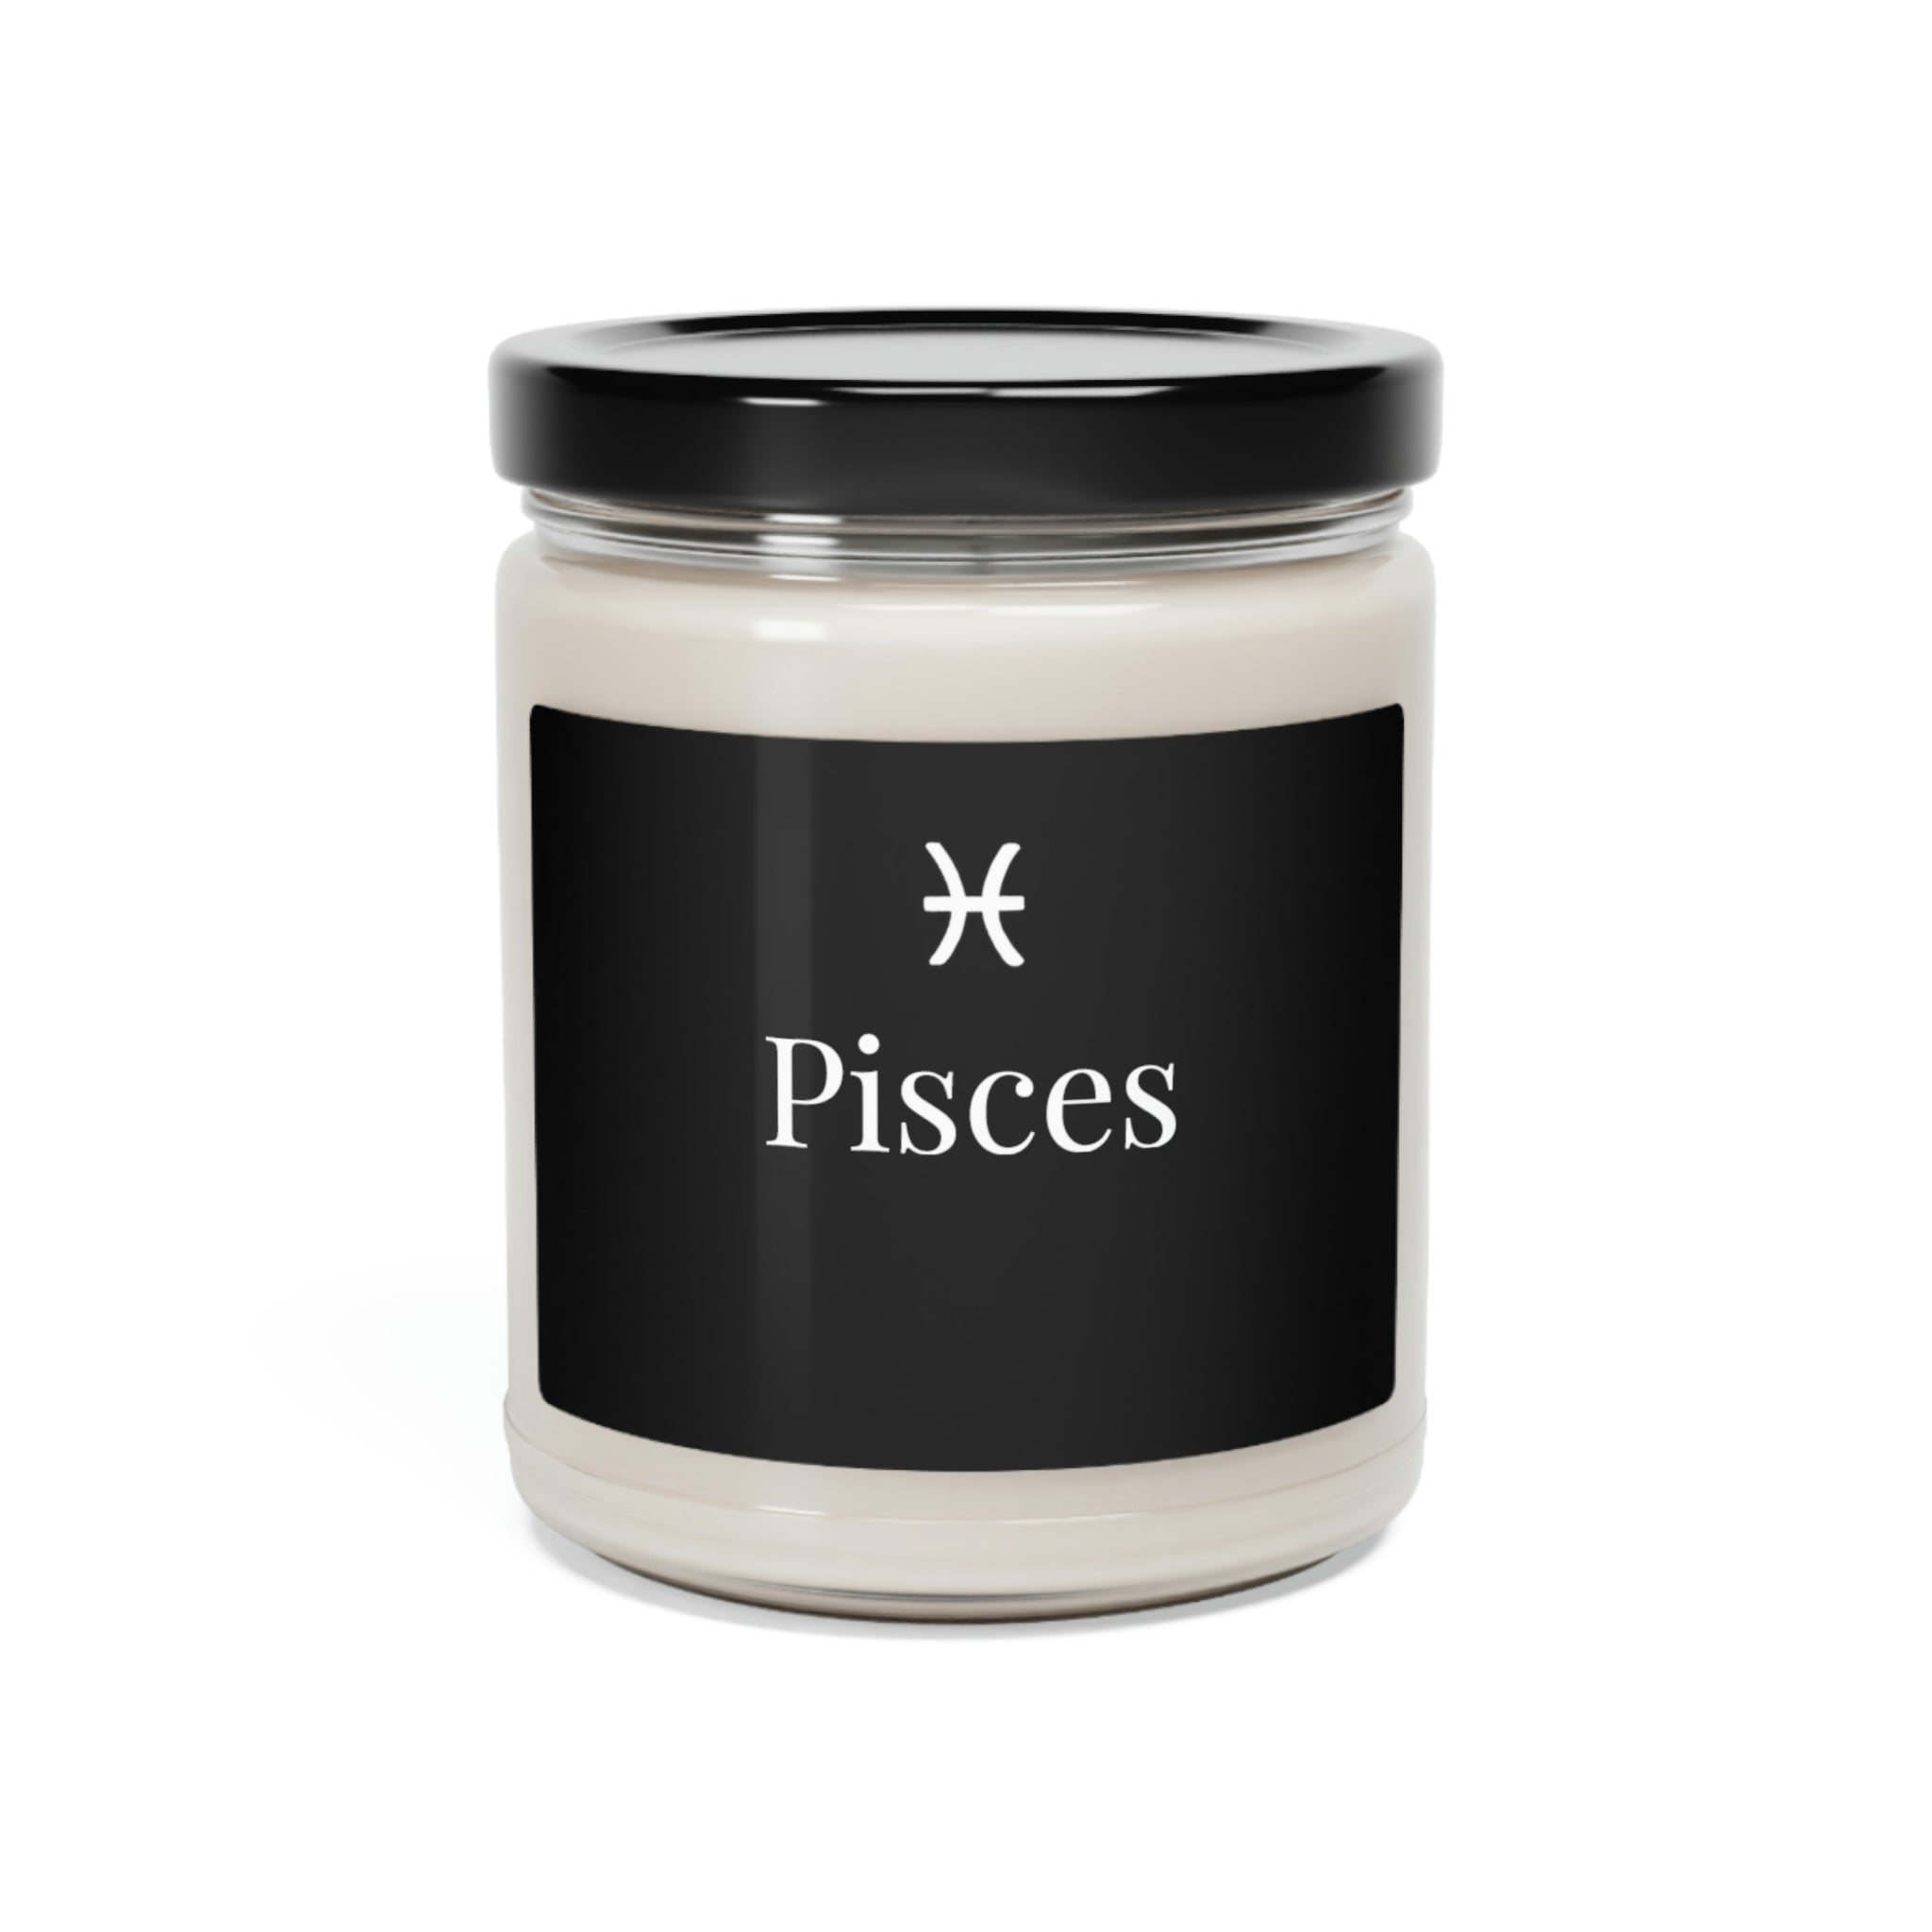 Pisces Scented Candle